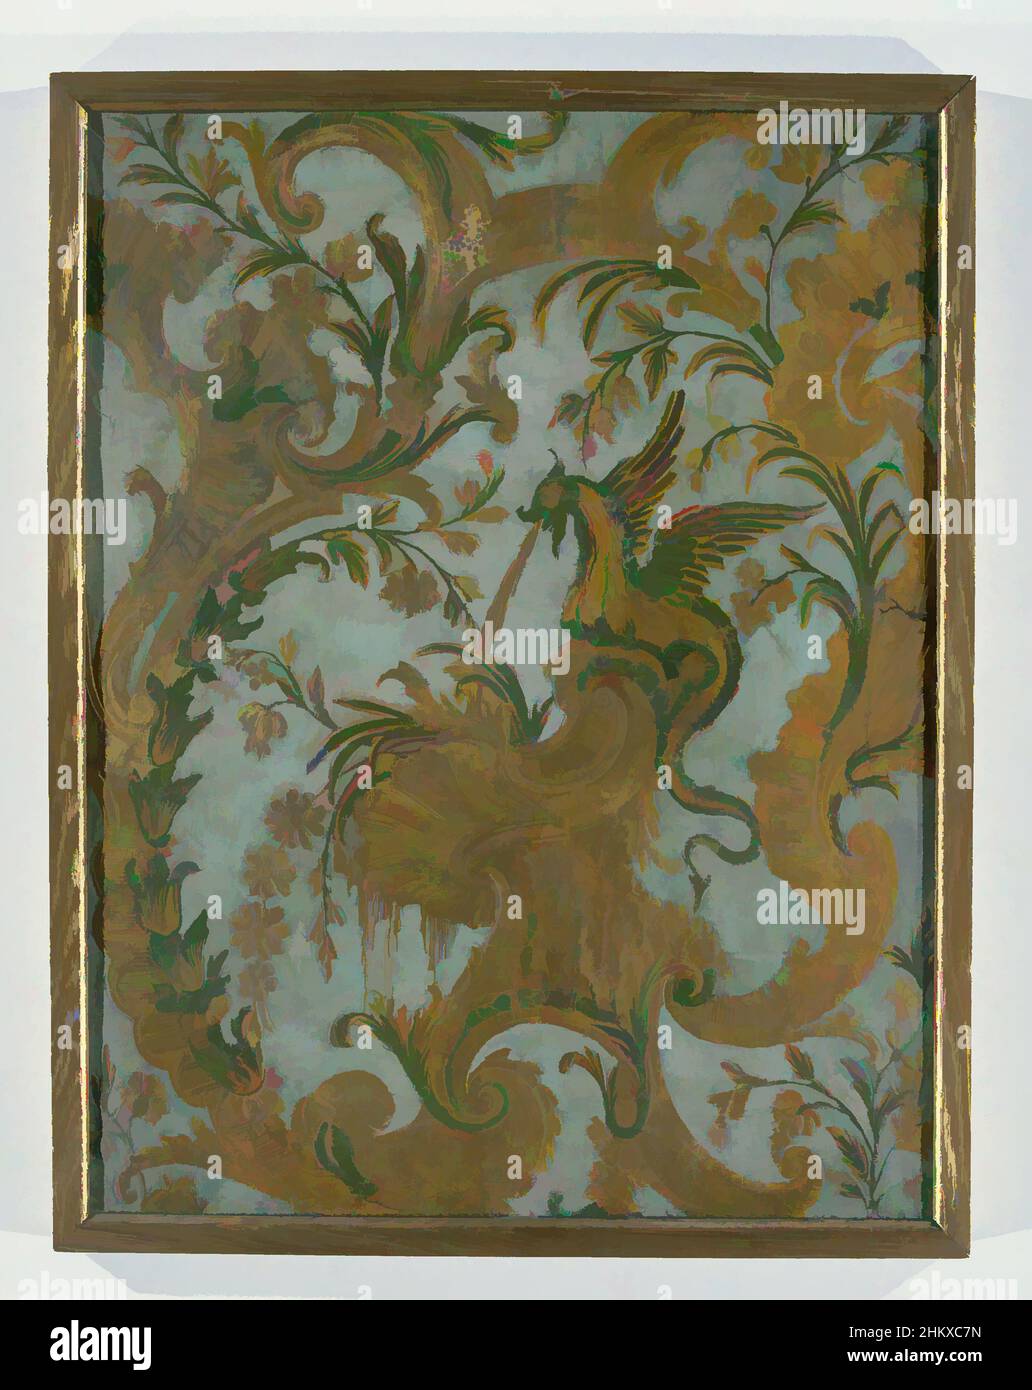 Art inspired by Gold leather, sheet, of so-called raised gold leather, with design of winged spitting dragon, Gold leather, sheet, of so-called raised gold leather, with design of winged spitting dragon, seated on a pied-de-stal, decorated with rocaille and framed with rocailles and, Classic works modernized by Artotop with a splash of modernity. Shapes, color and value, eye-catching visual impact on art. Emotions through freedom of artworks in a contemporary way. A timeless message pursuing a wildly creative new direction. Artists turning to the digital medium and creating the Artotop NFT Stock Photo